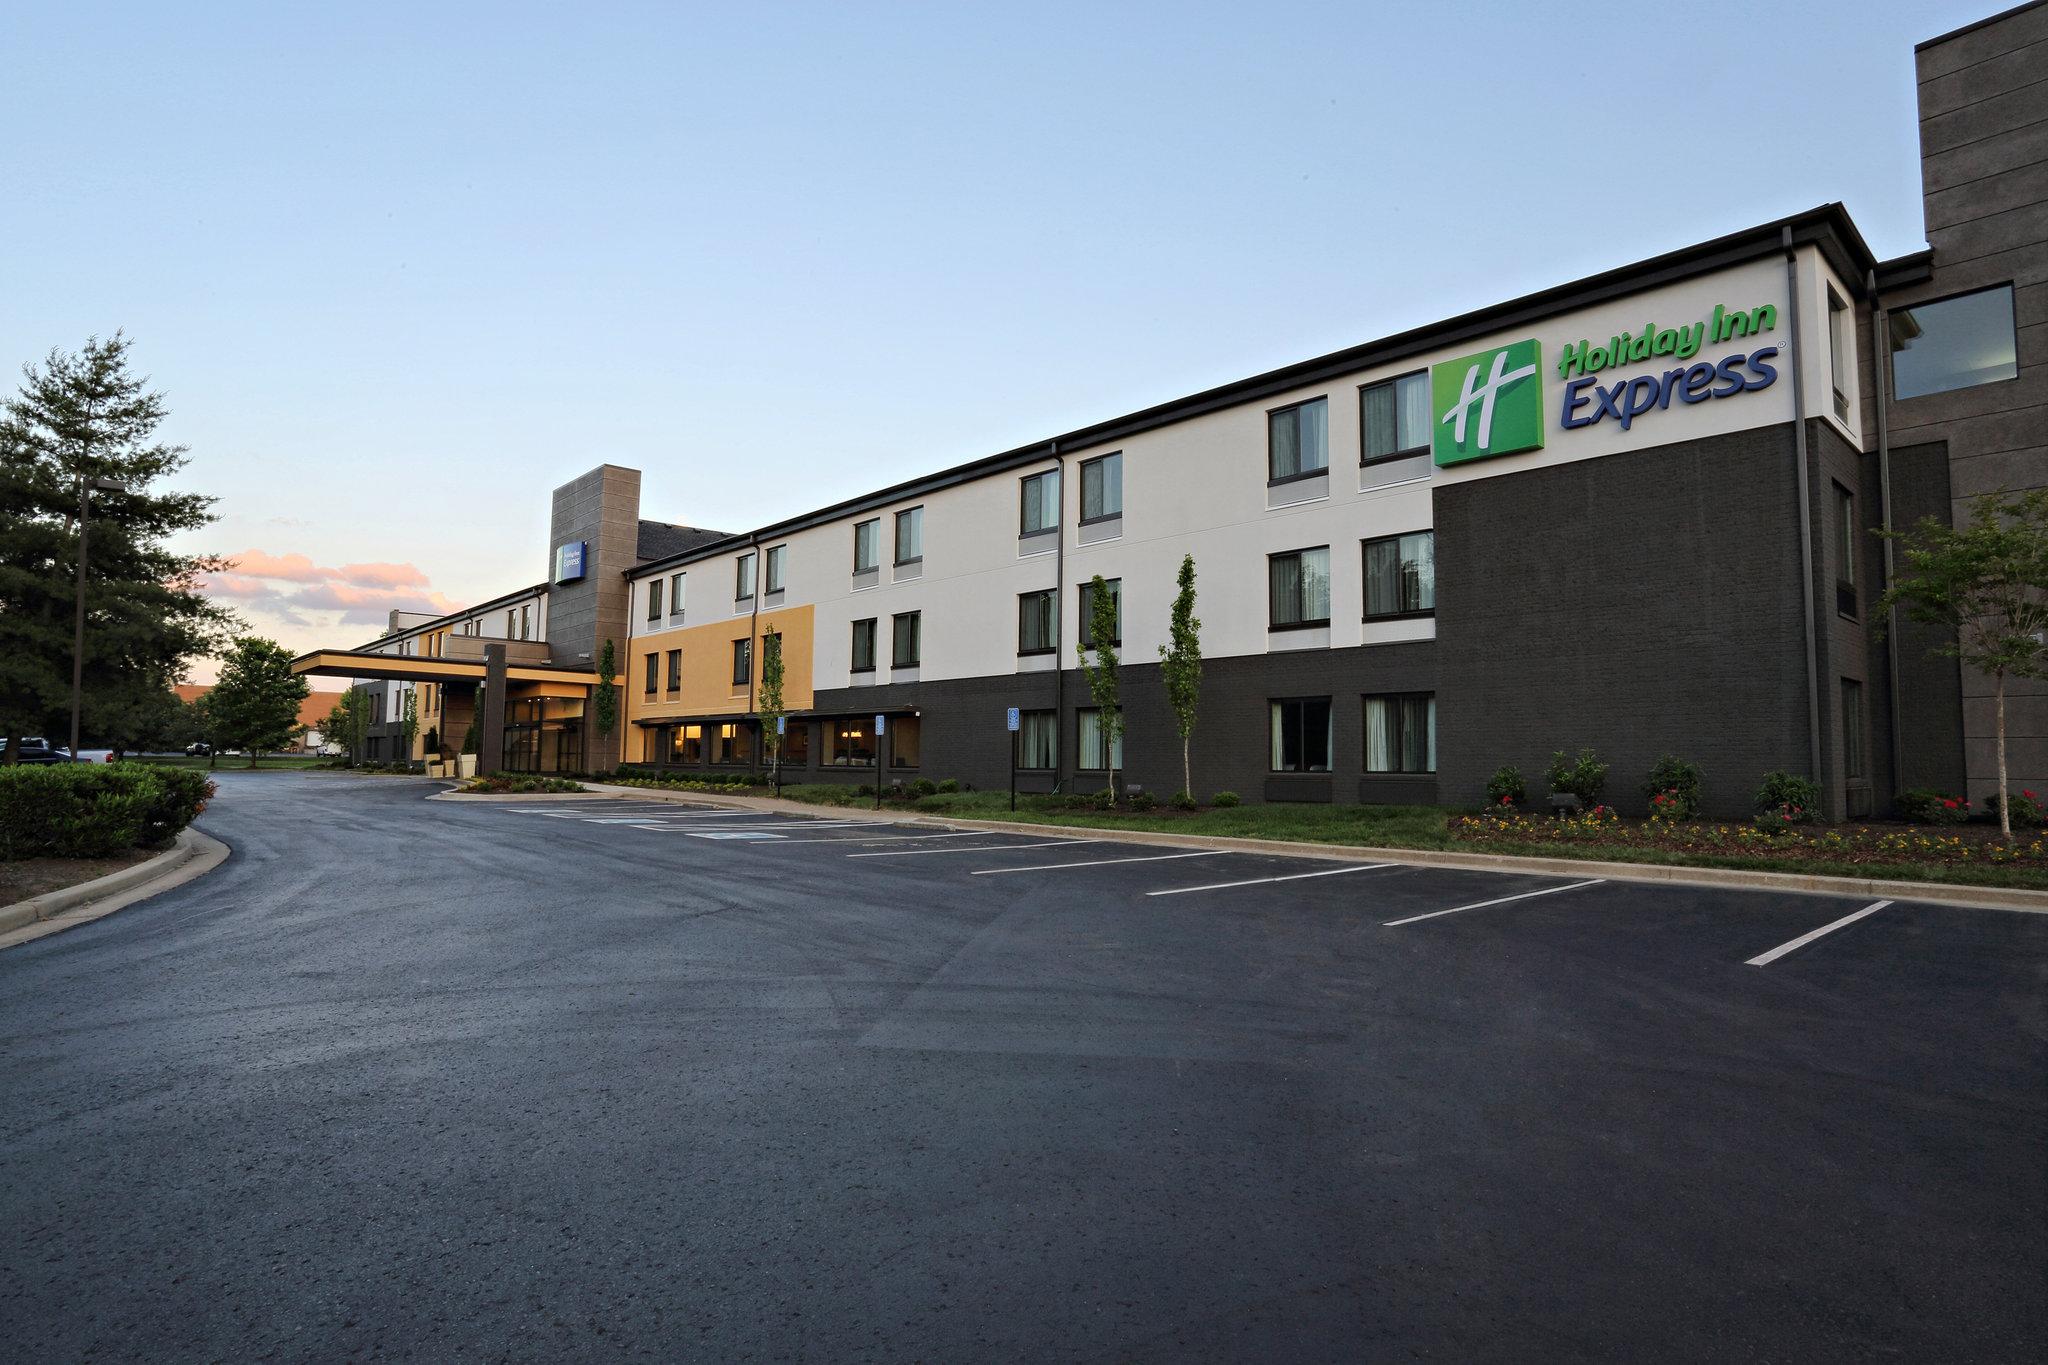 Holiday Inn Express Brentwood South - Cool Springs in Brentwood, TN